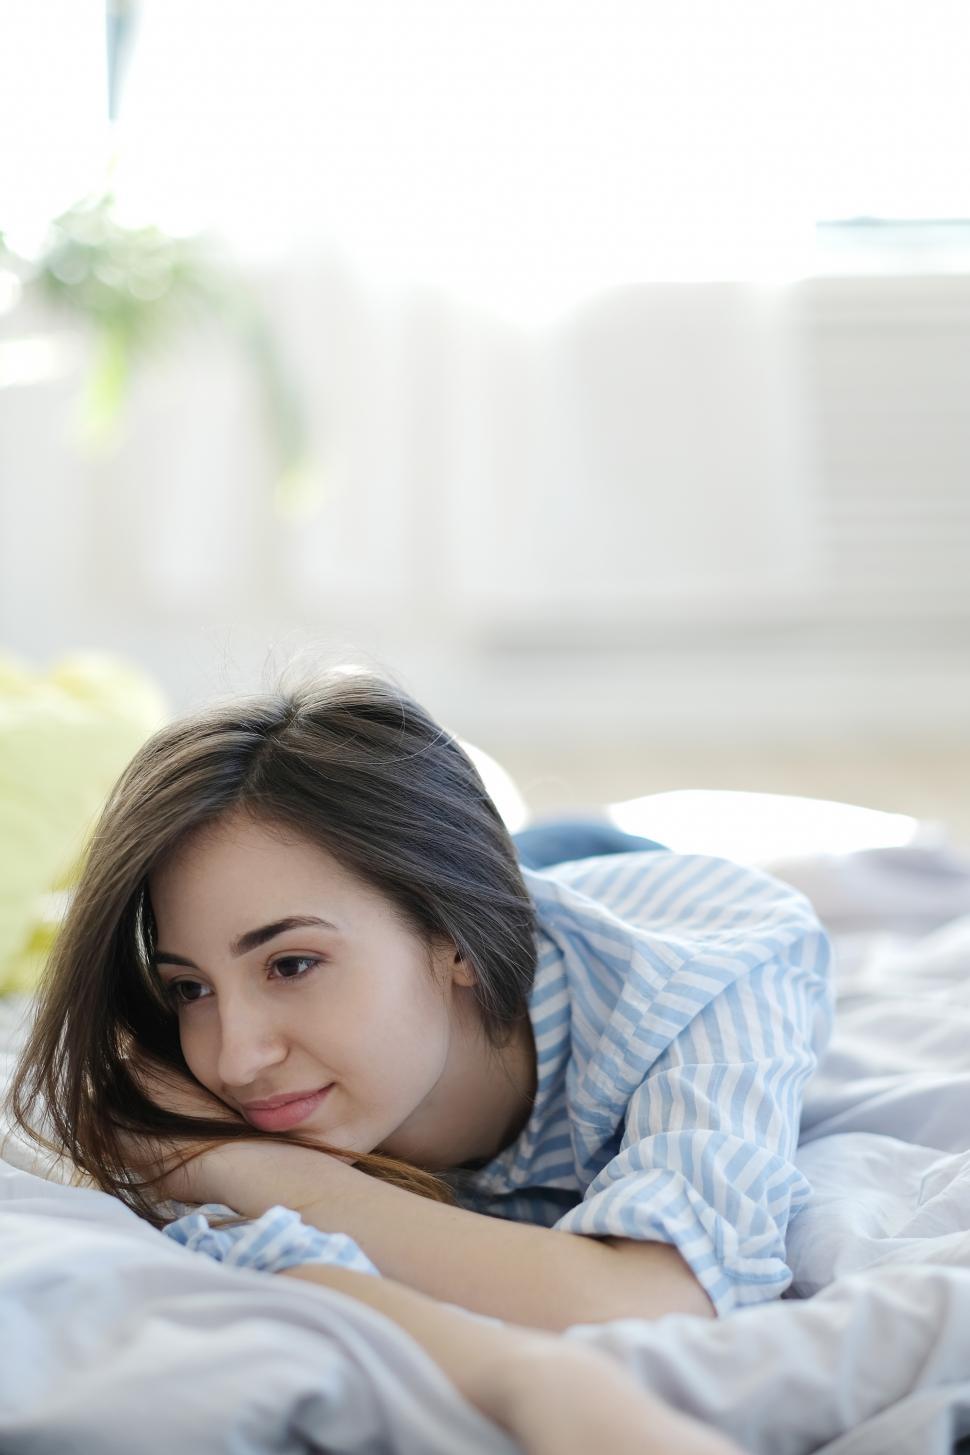 Download Free Stock Photo of Lounging thoughtfully in bed 